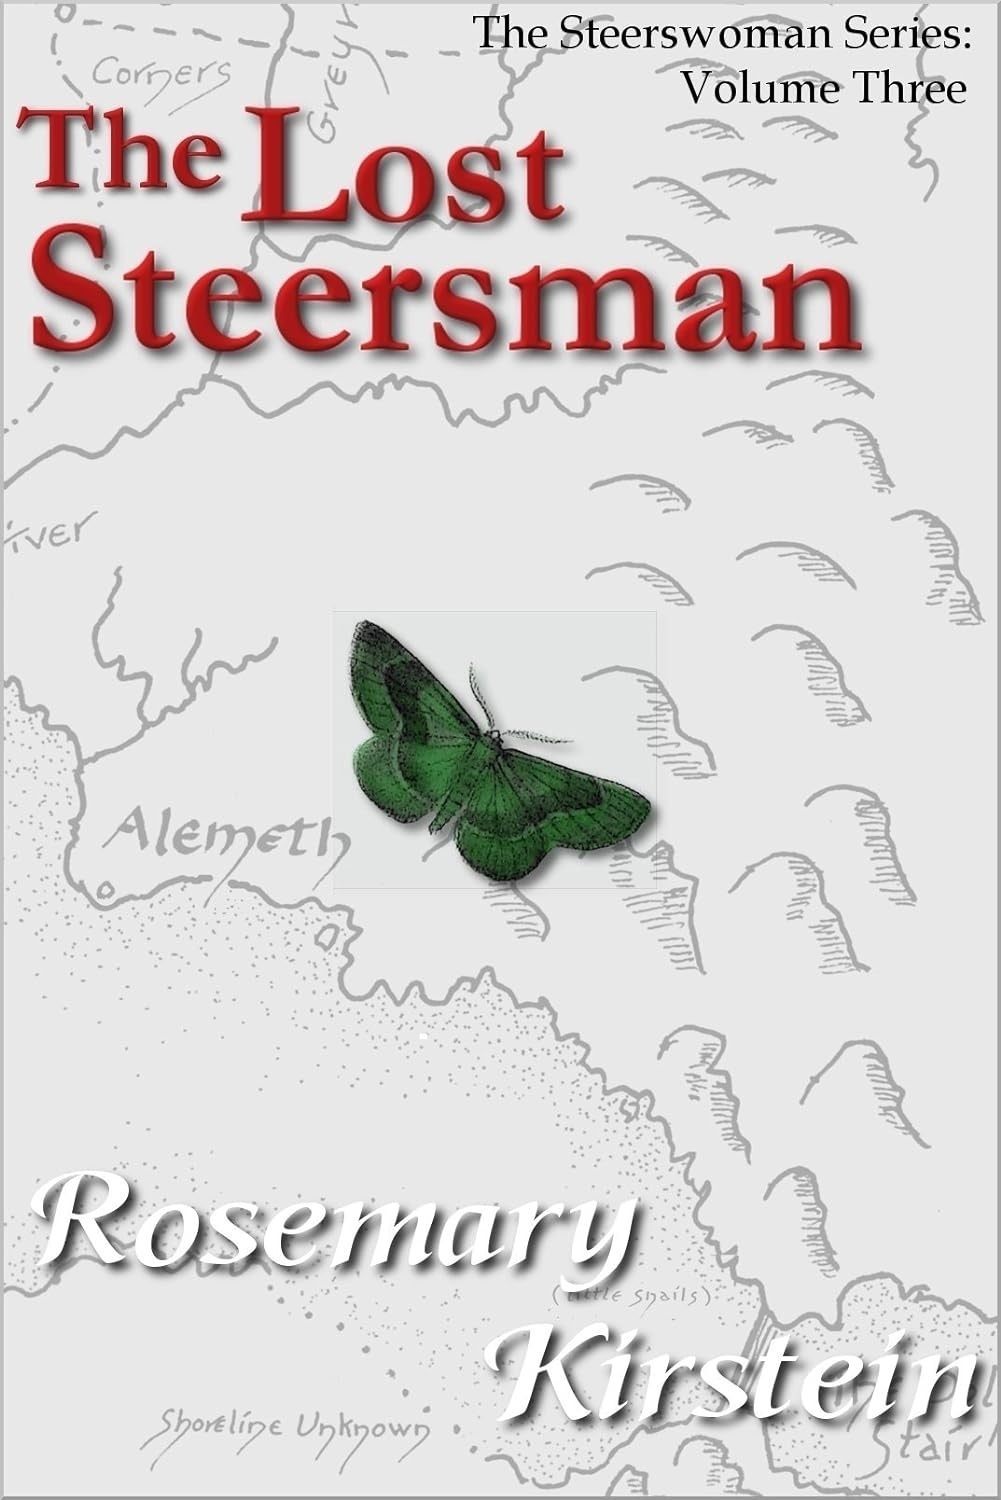 Book cover: The Lost Steersman.